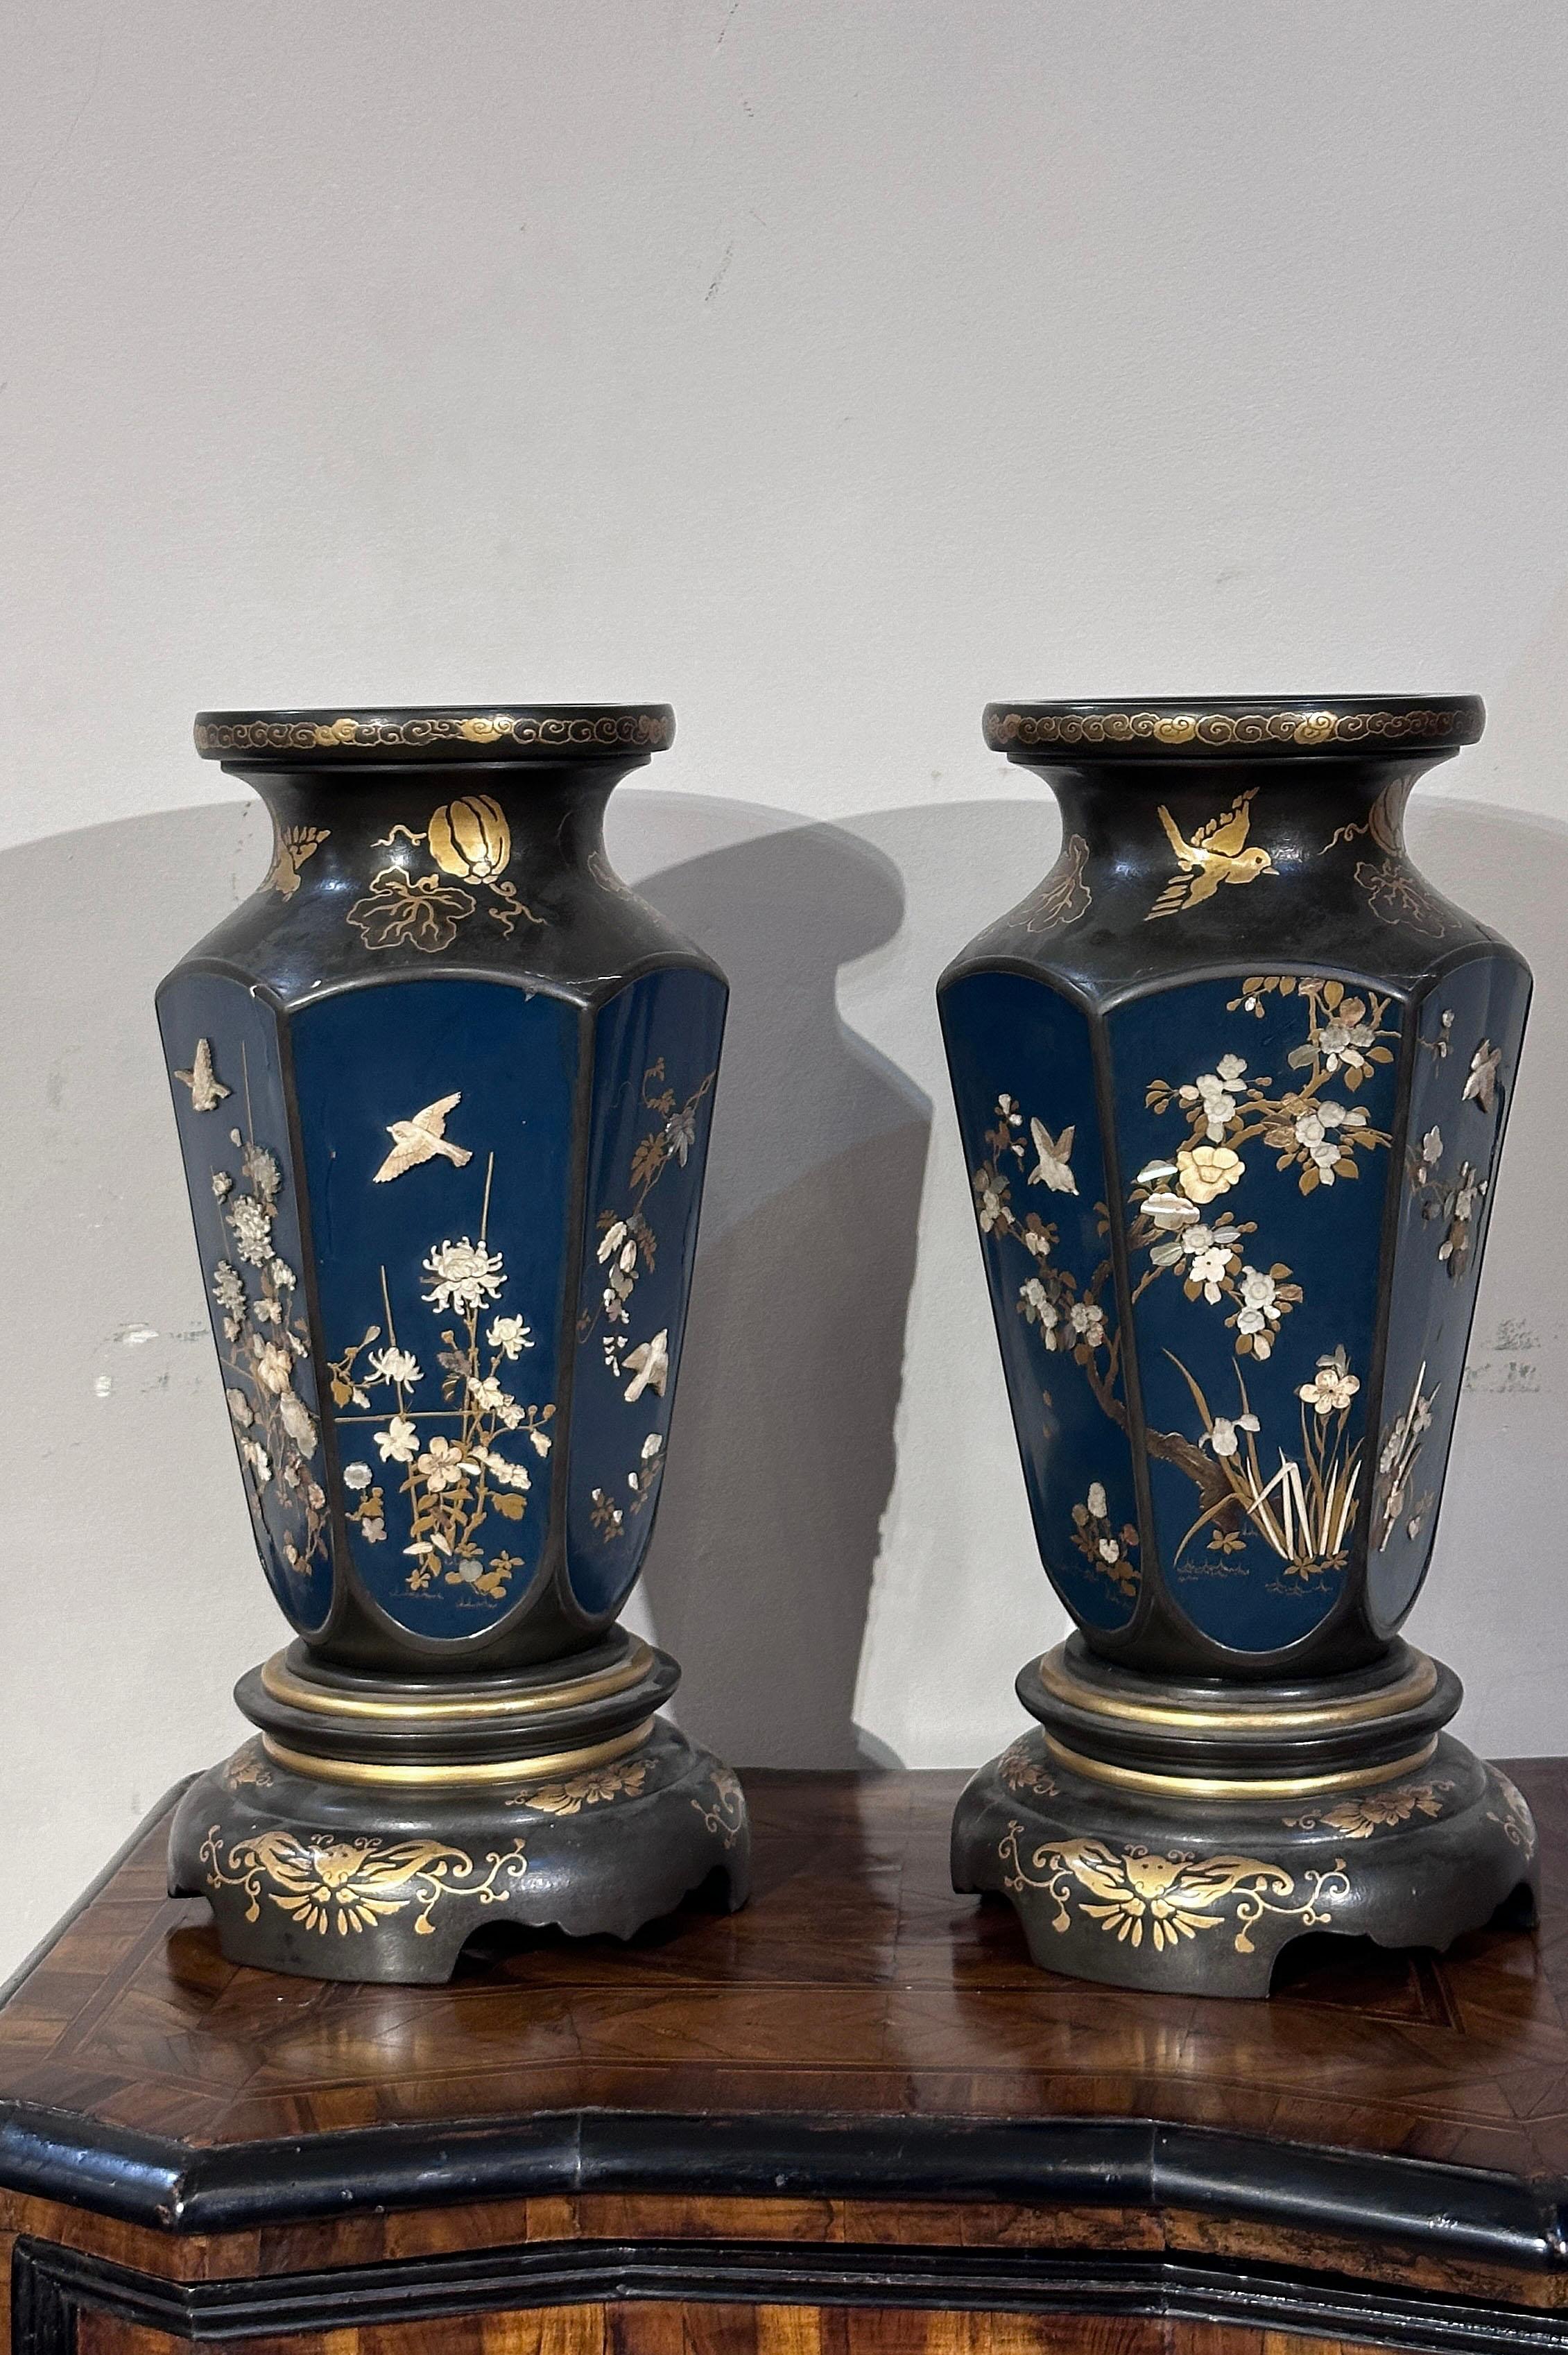 Beautiful pair of wooden vases lacquered in an elegant shade of blue, and decorated with light wood inlays and golden finishes. The inlays depict delicate floral and bird motifs, creating an idyllic and evocative atmosphere. The golden finishes,